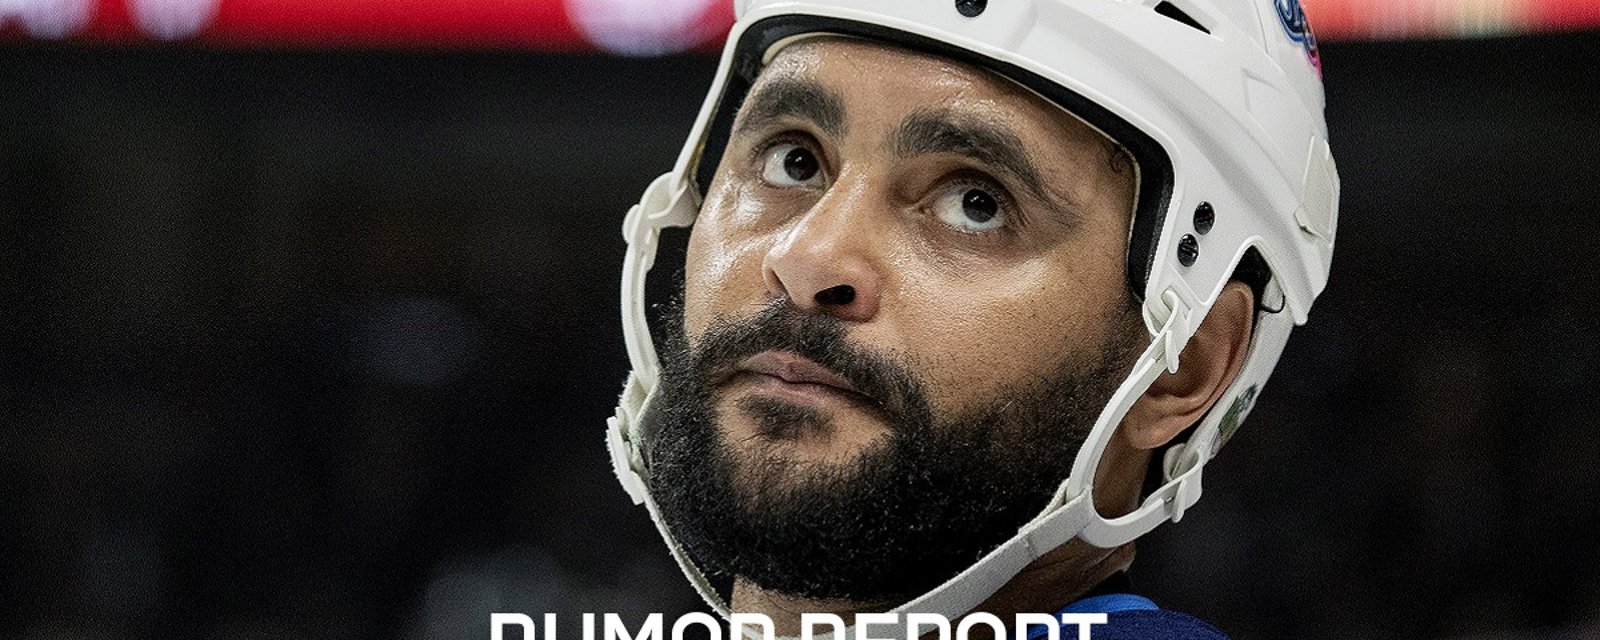 A second NHL insider expresses serious doubt about Byfuglien's return.